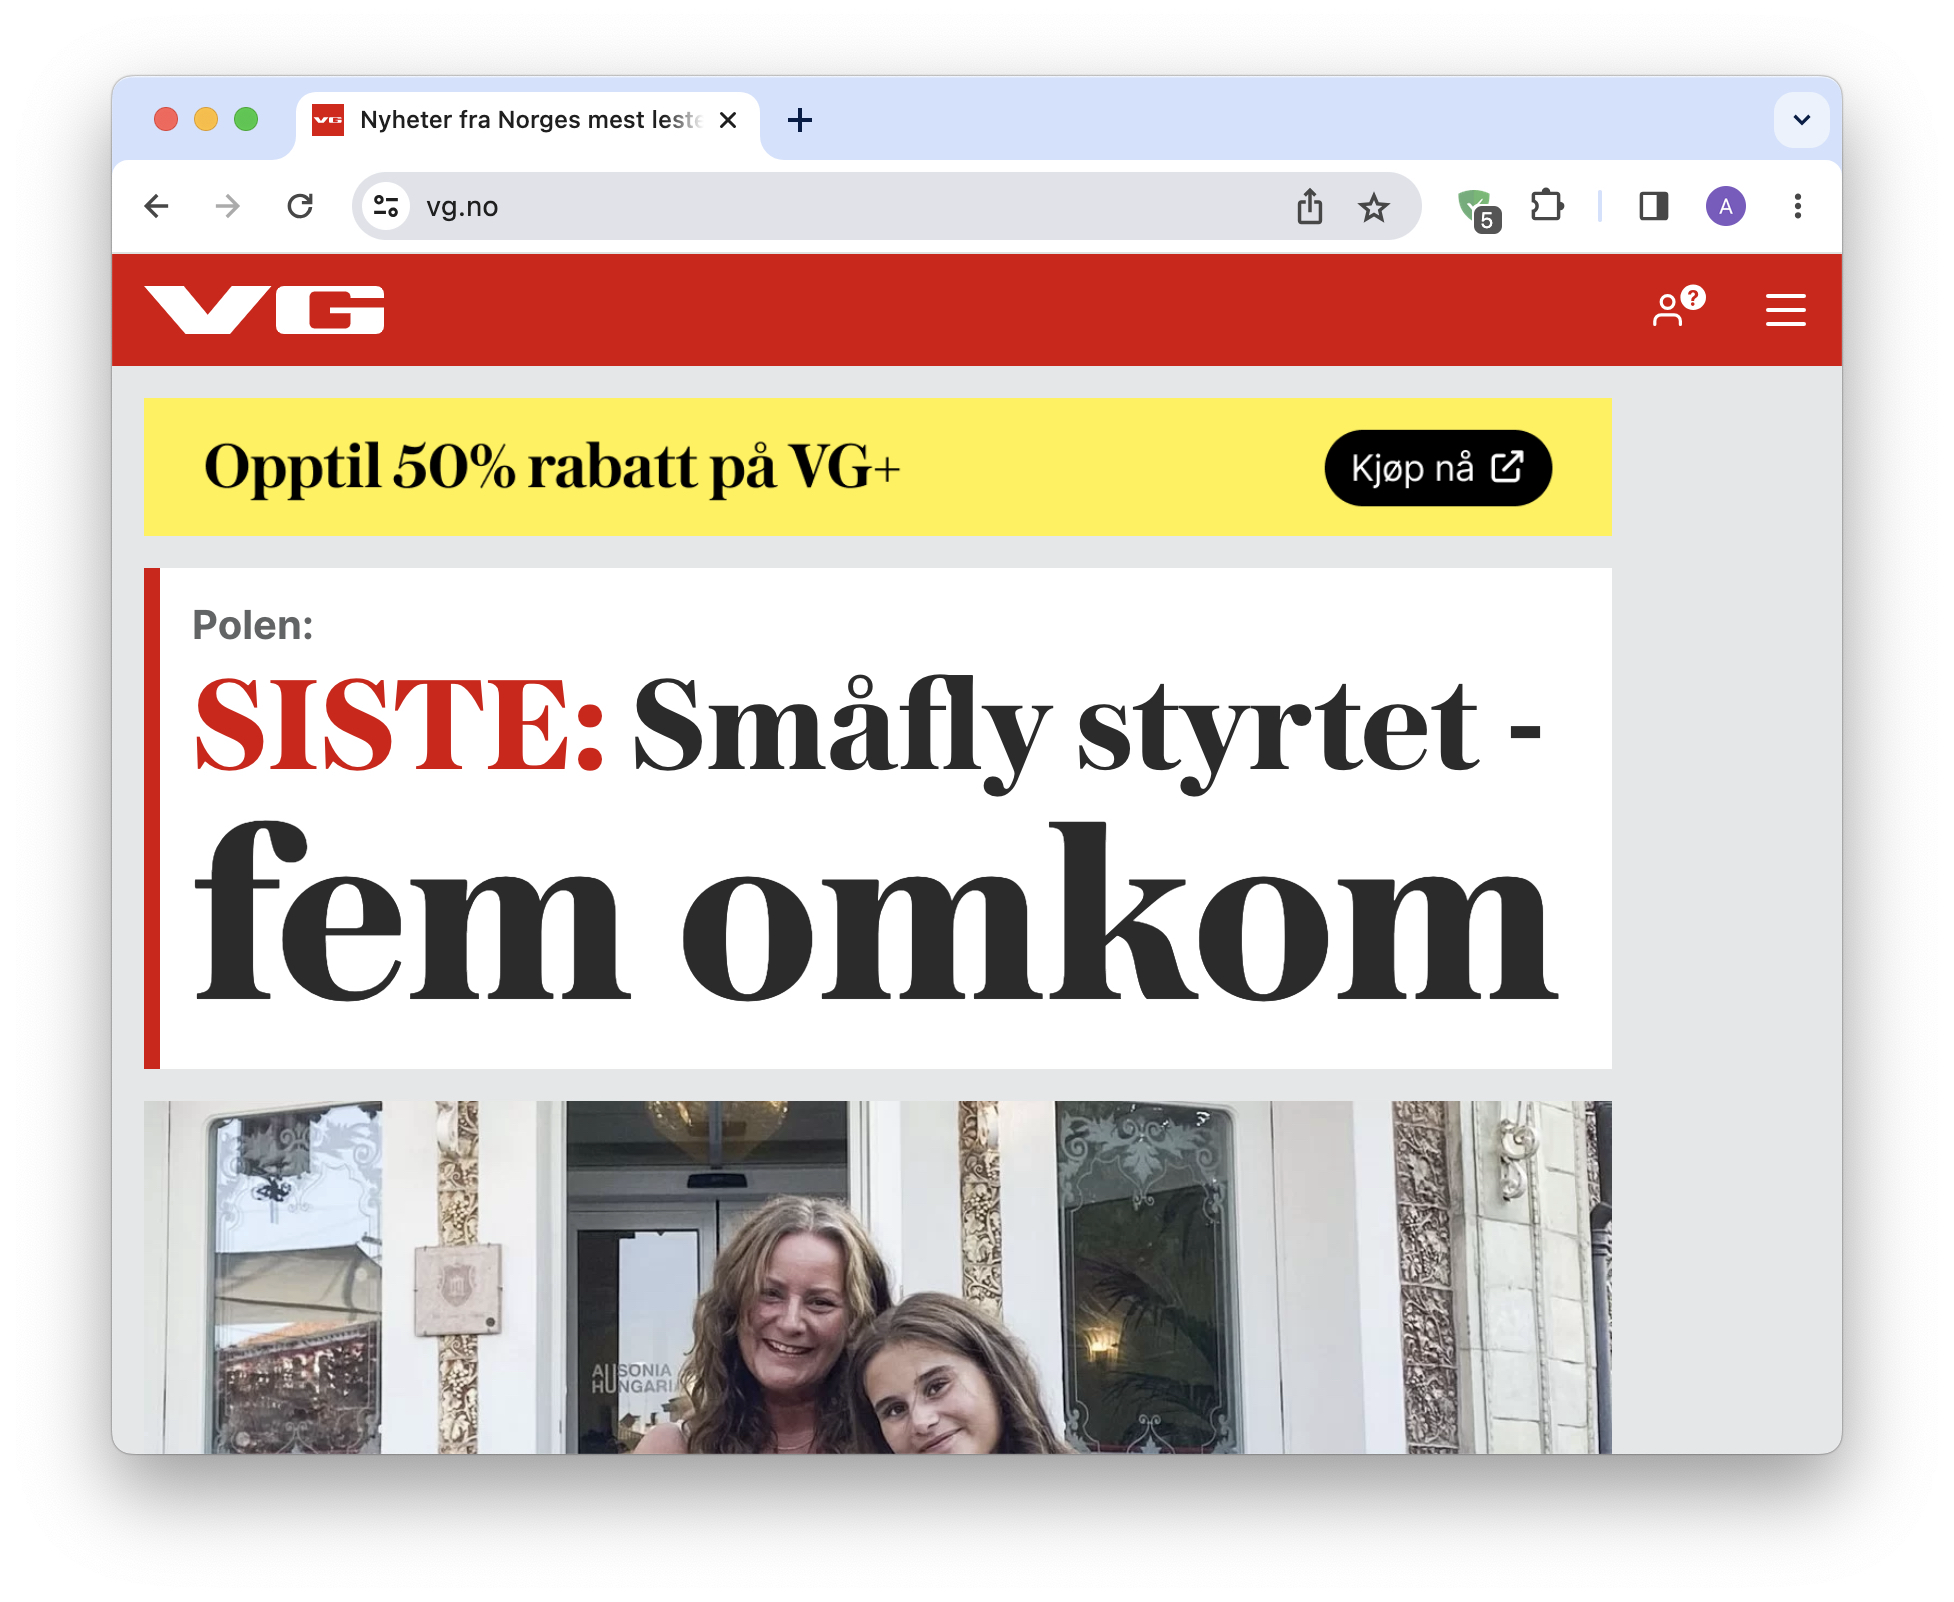 Norway Bans Meta From Showing Users Personalized Ads